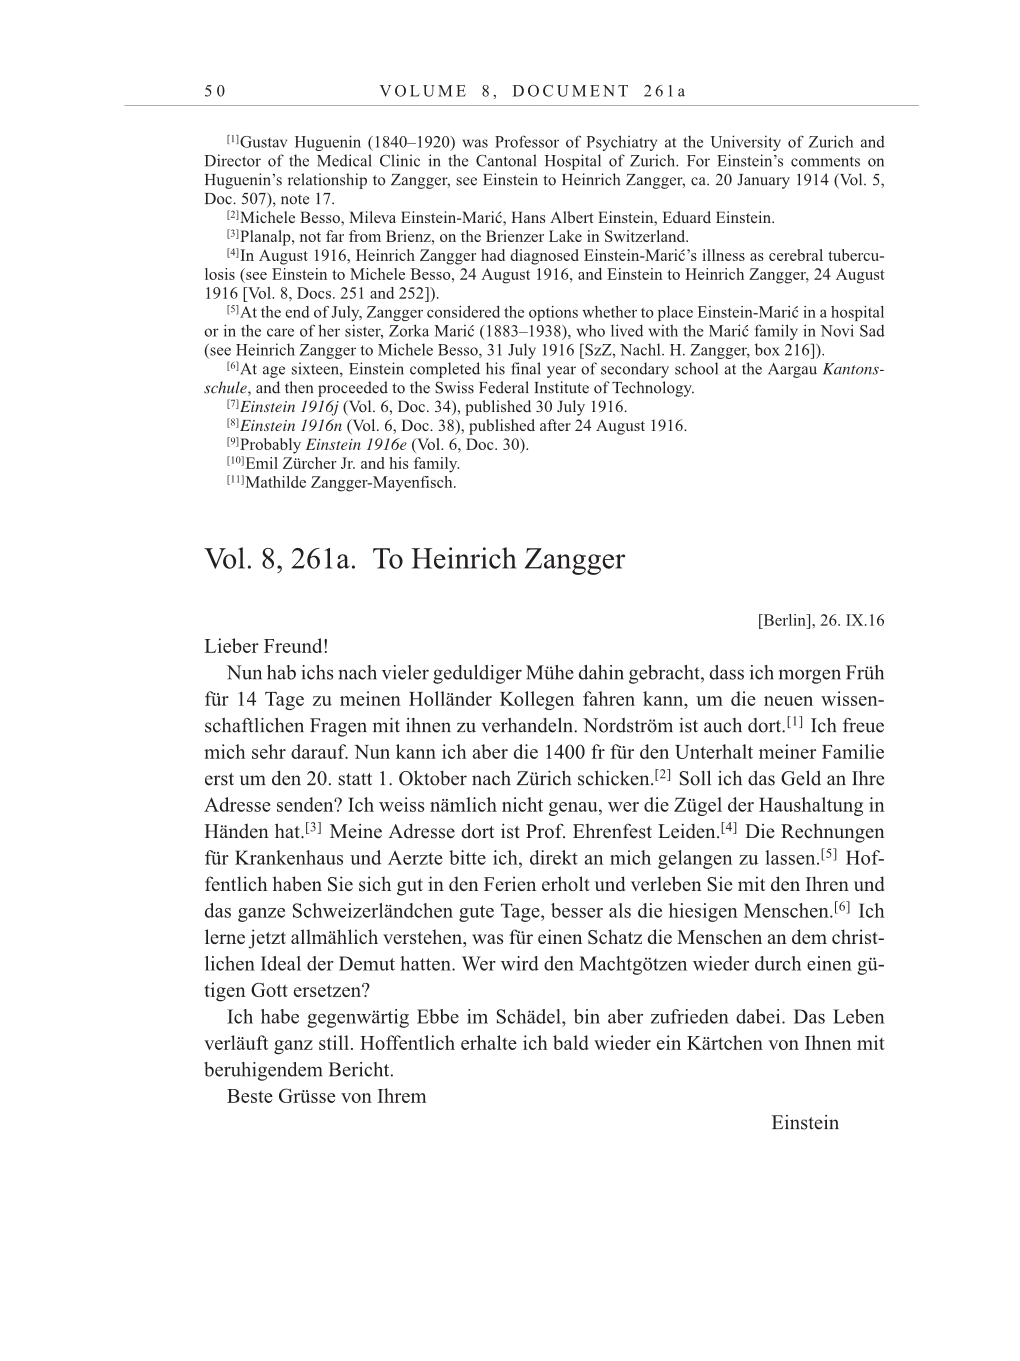 Volume 10: The Berlin Years: Correspondence May-December 1920 / Supplementary Correspondence 1909-1920 page 50